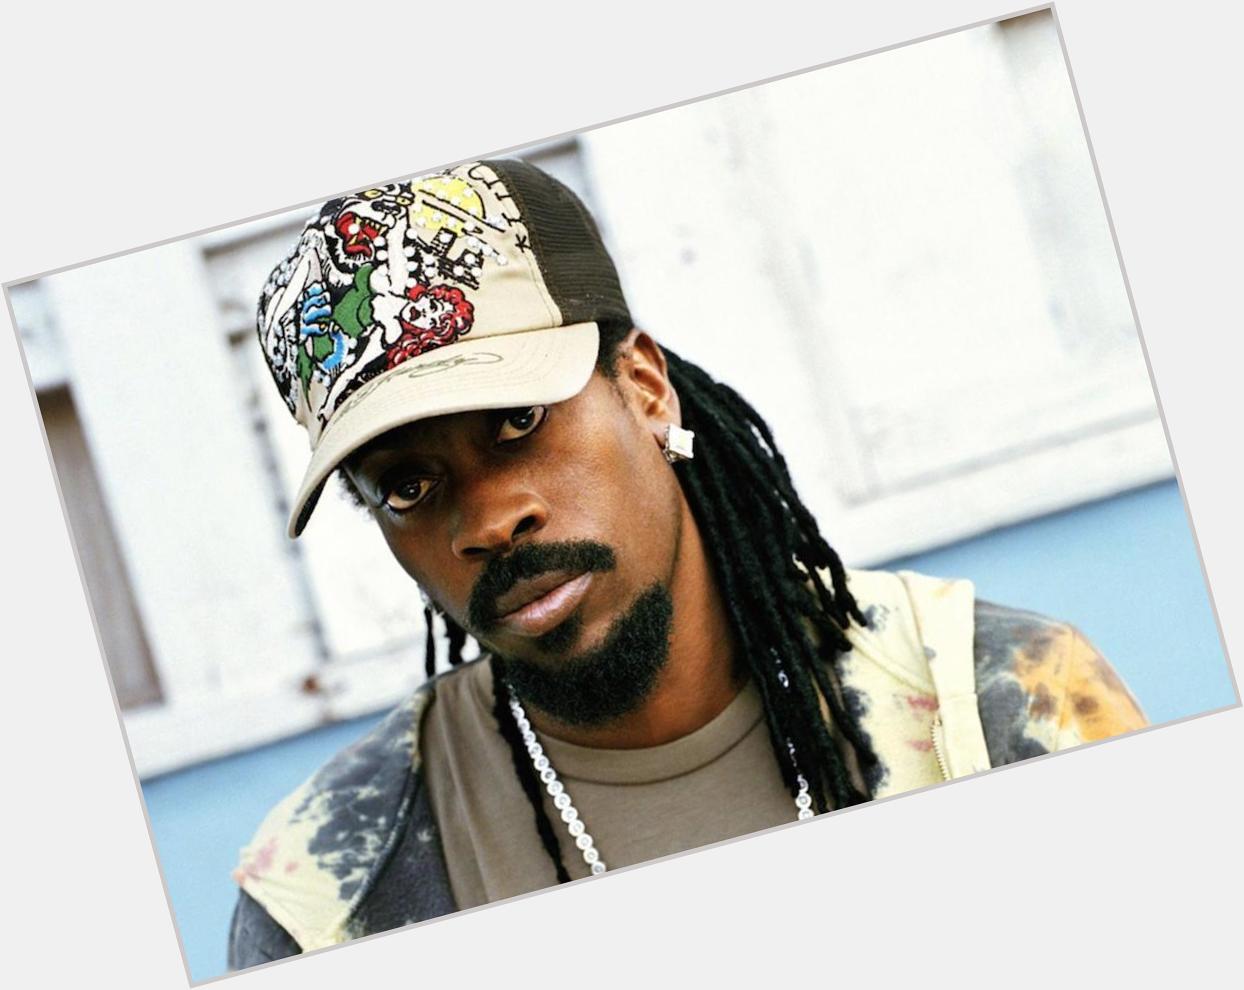 King of the Dancehall celebrates his 42nd birthday today. Salute!  